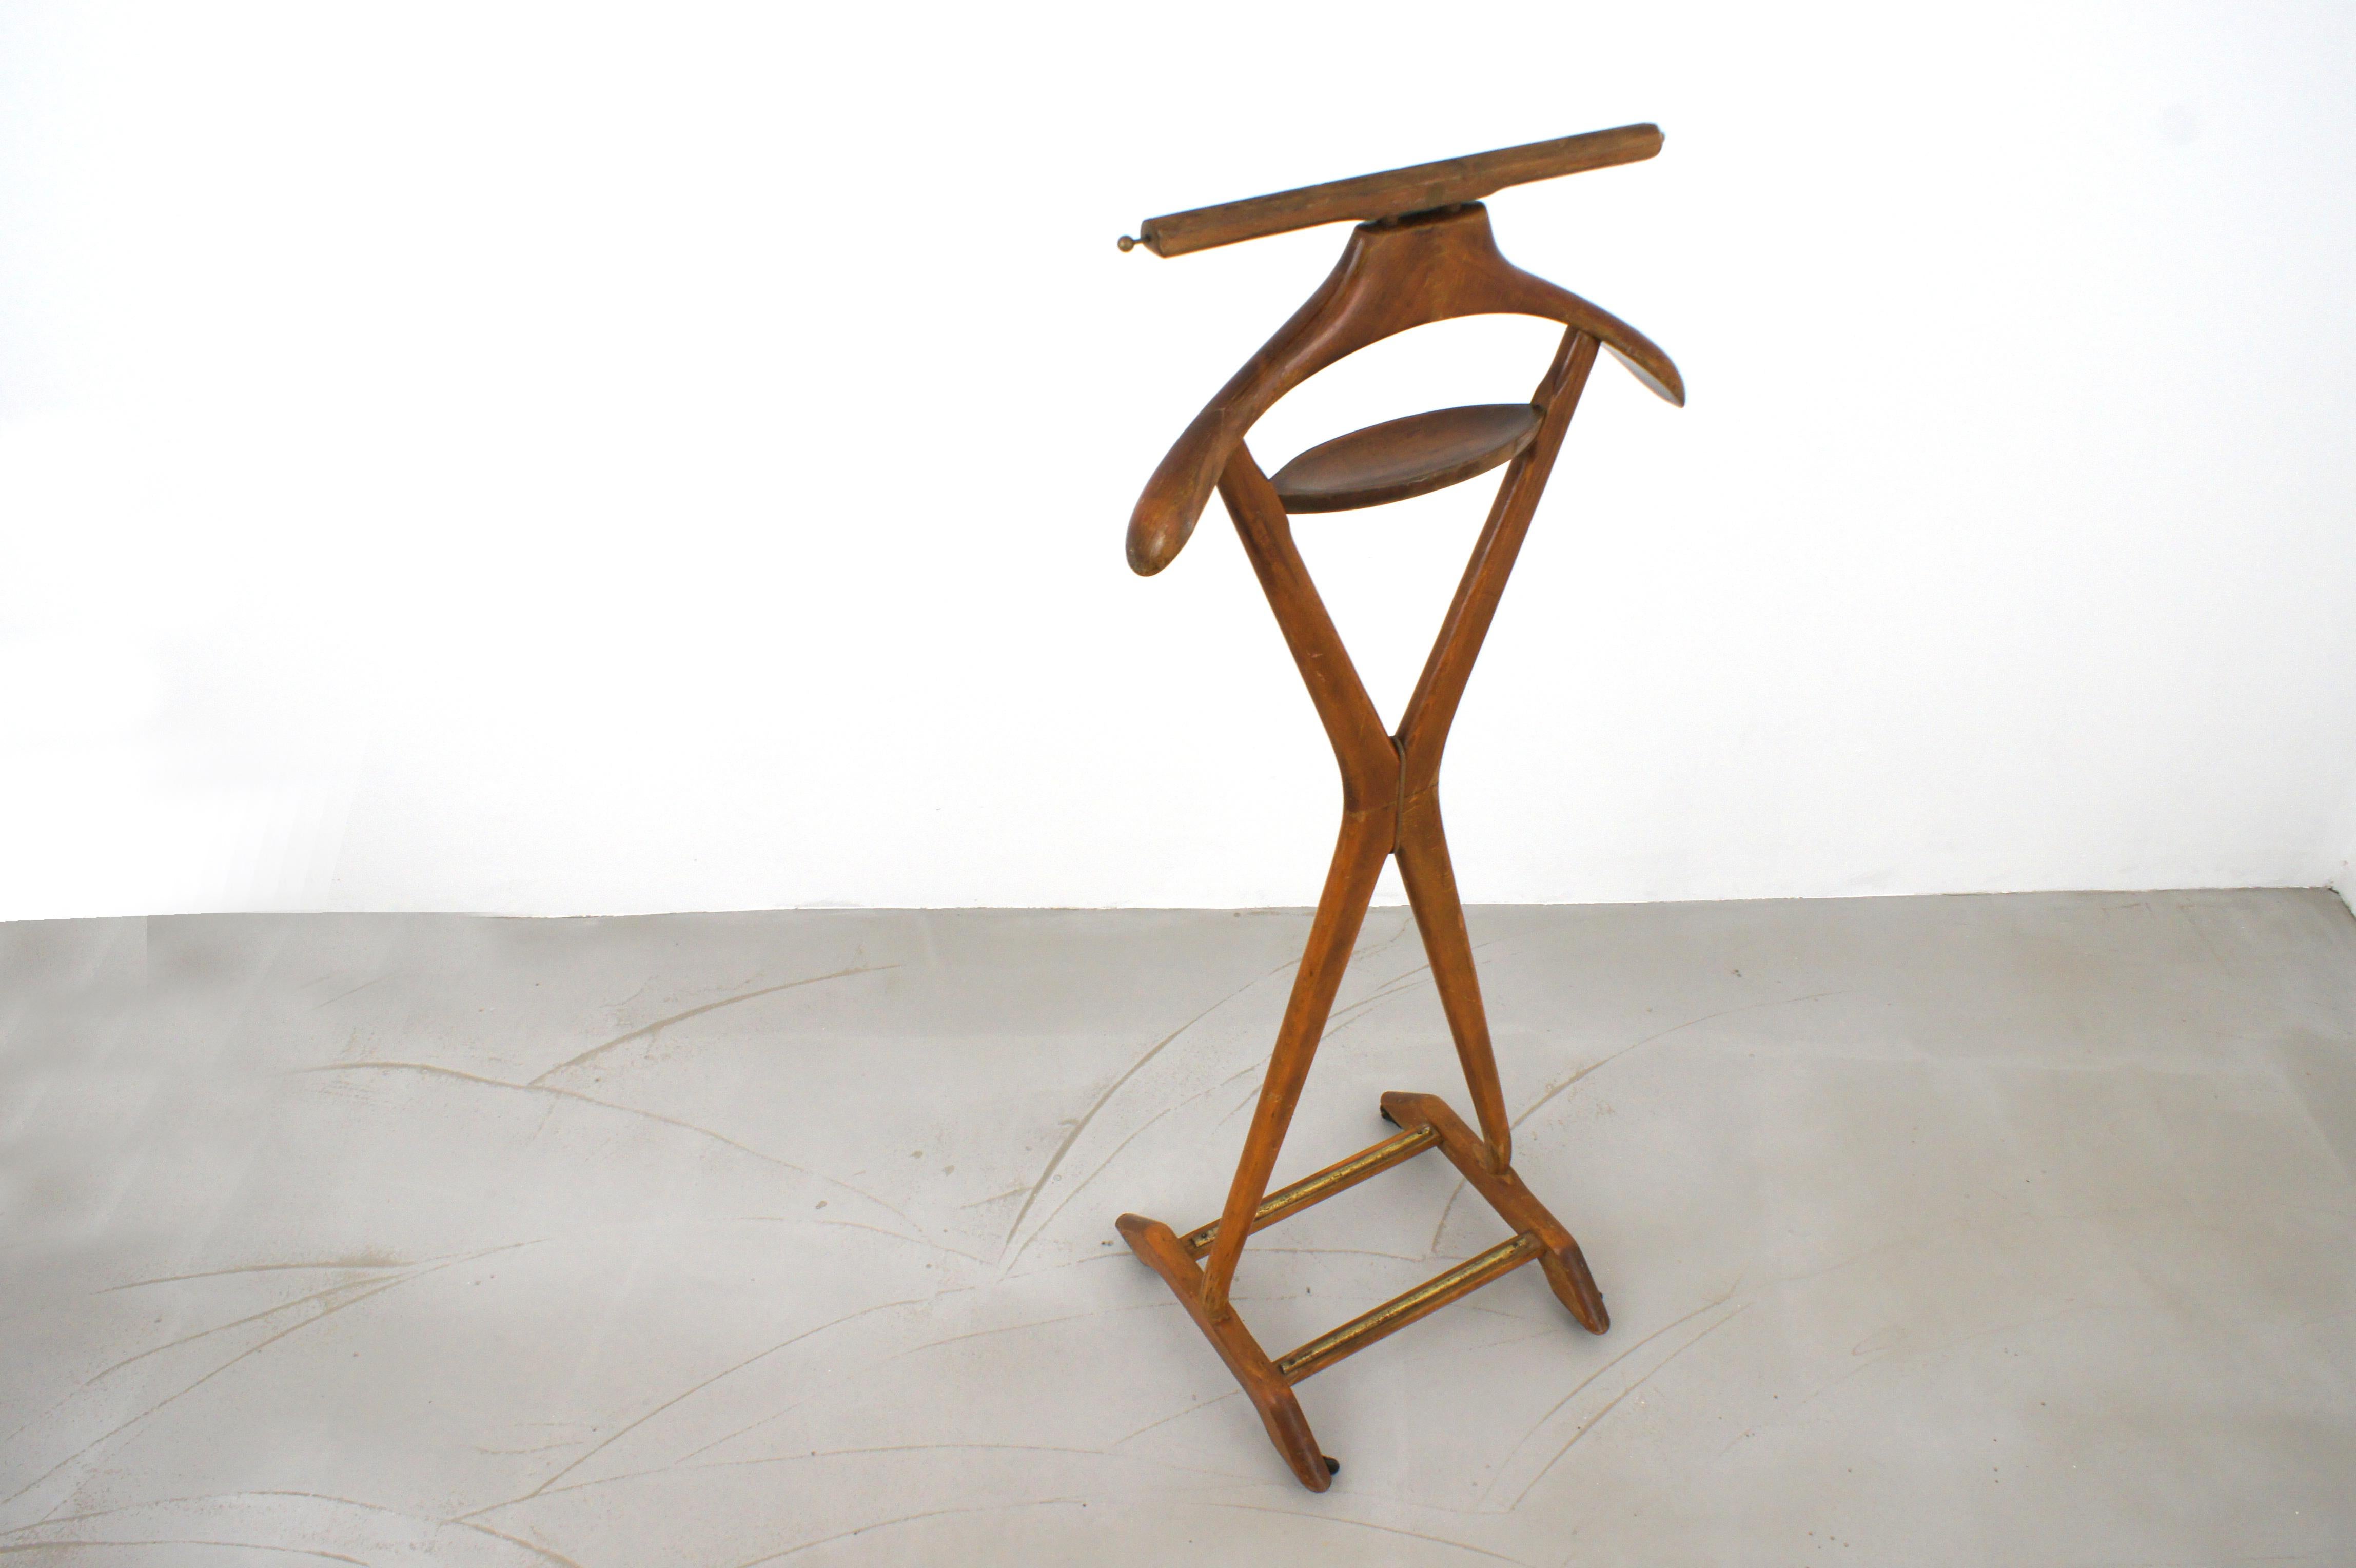 Italian-made valet from the 1950s with a design traceable to Ico parisi.